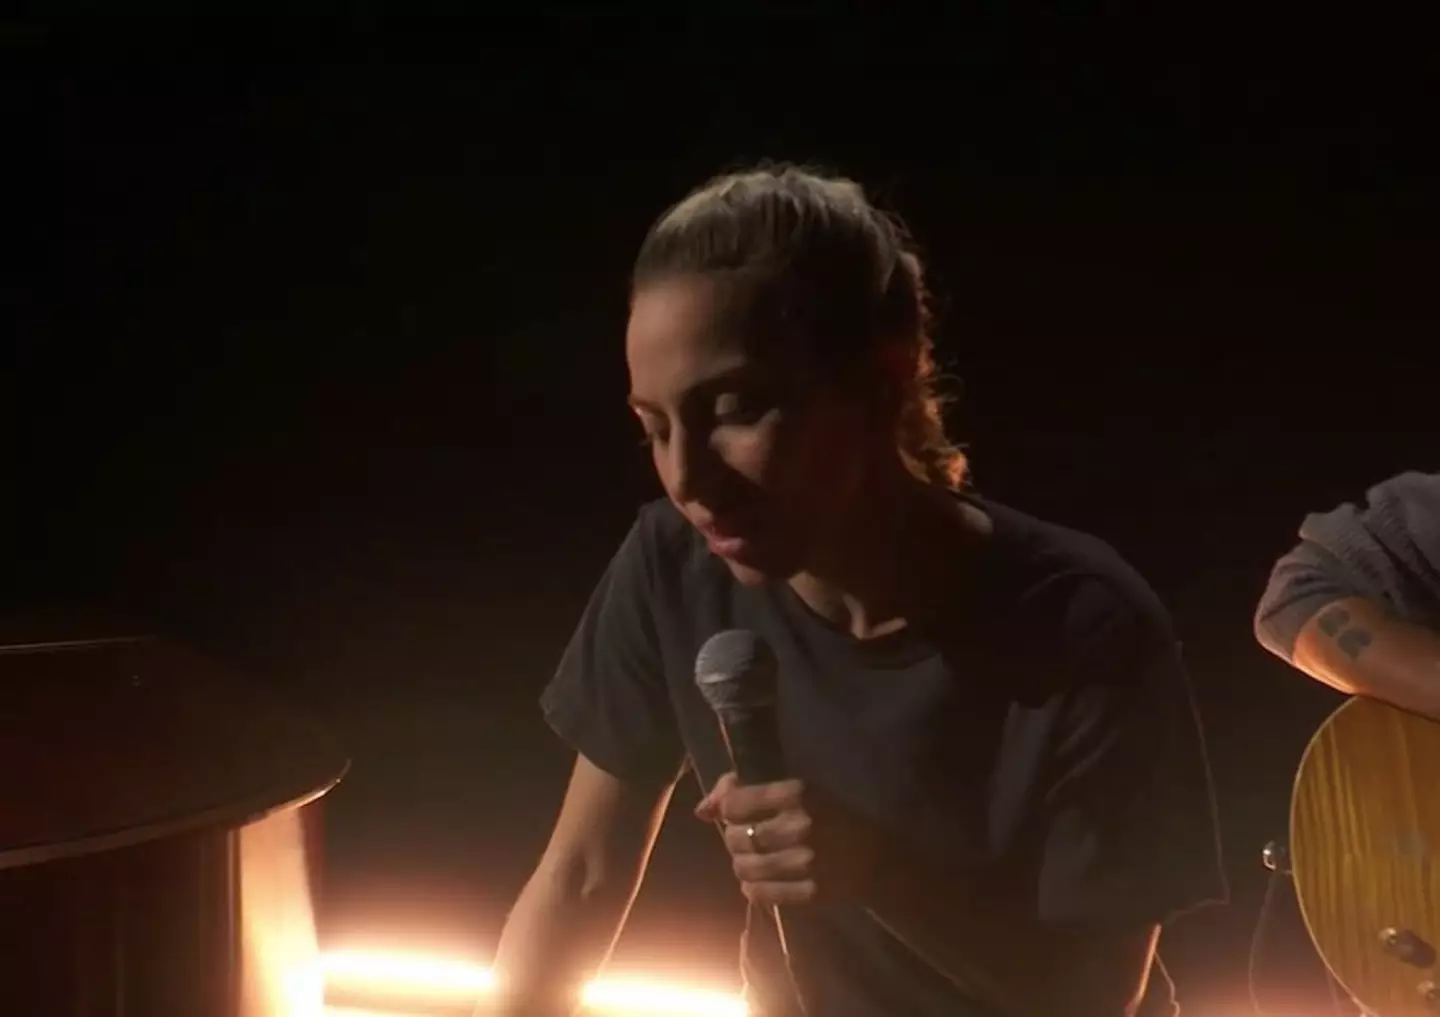 Lady Gaga performed a stripped back version of 'Hold My Hand' at the Oscars.